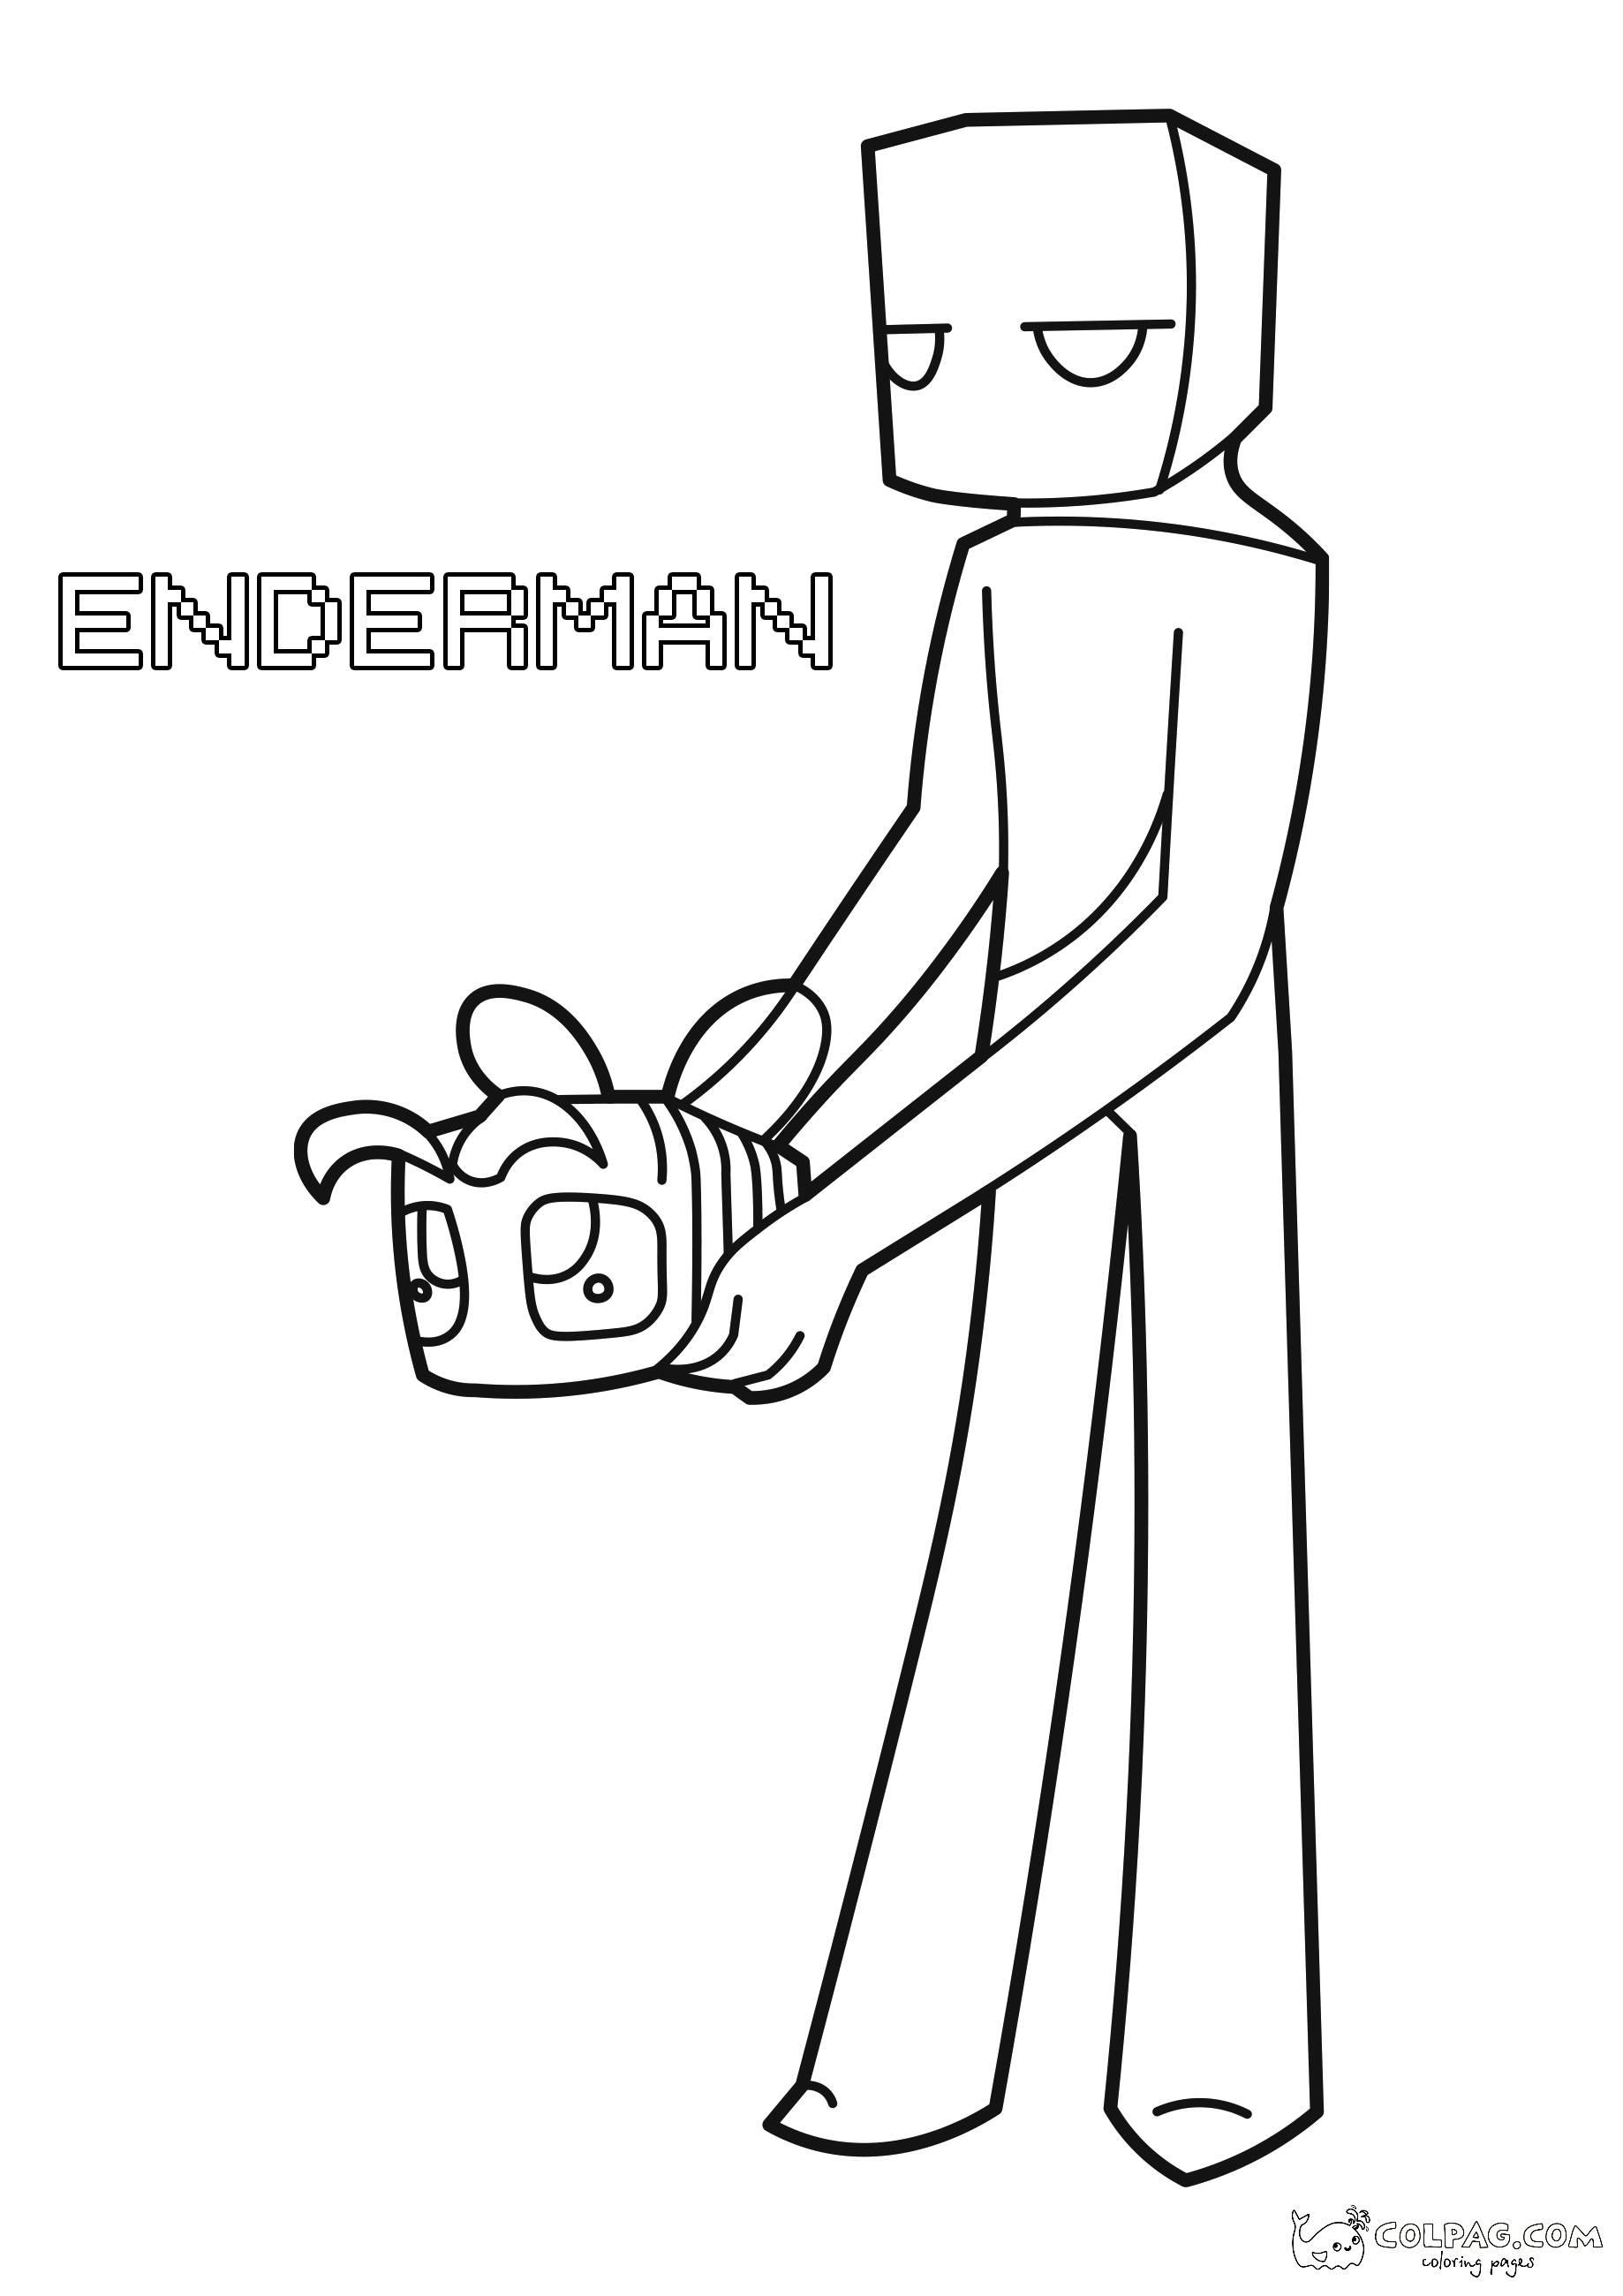 enderman-1-minecraft-coloring-page-colpag